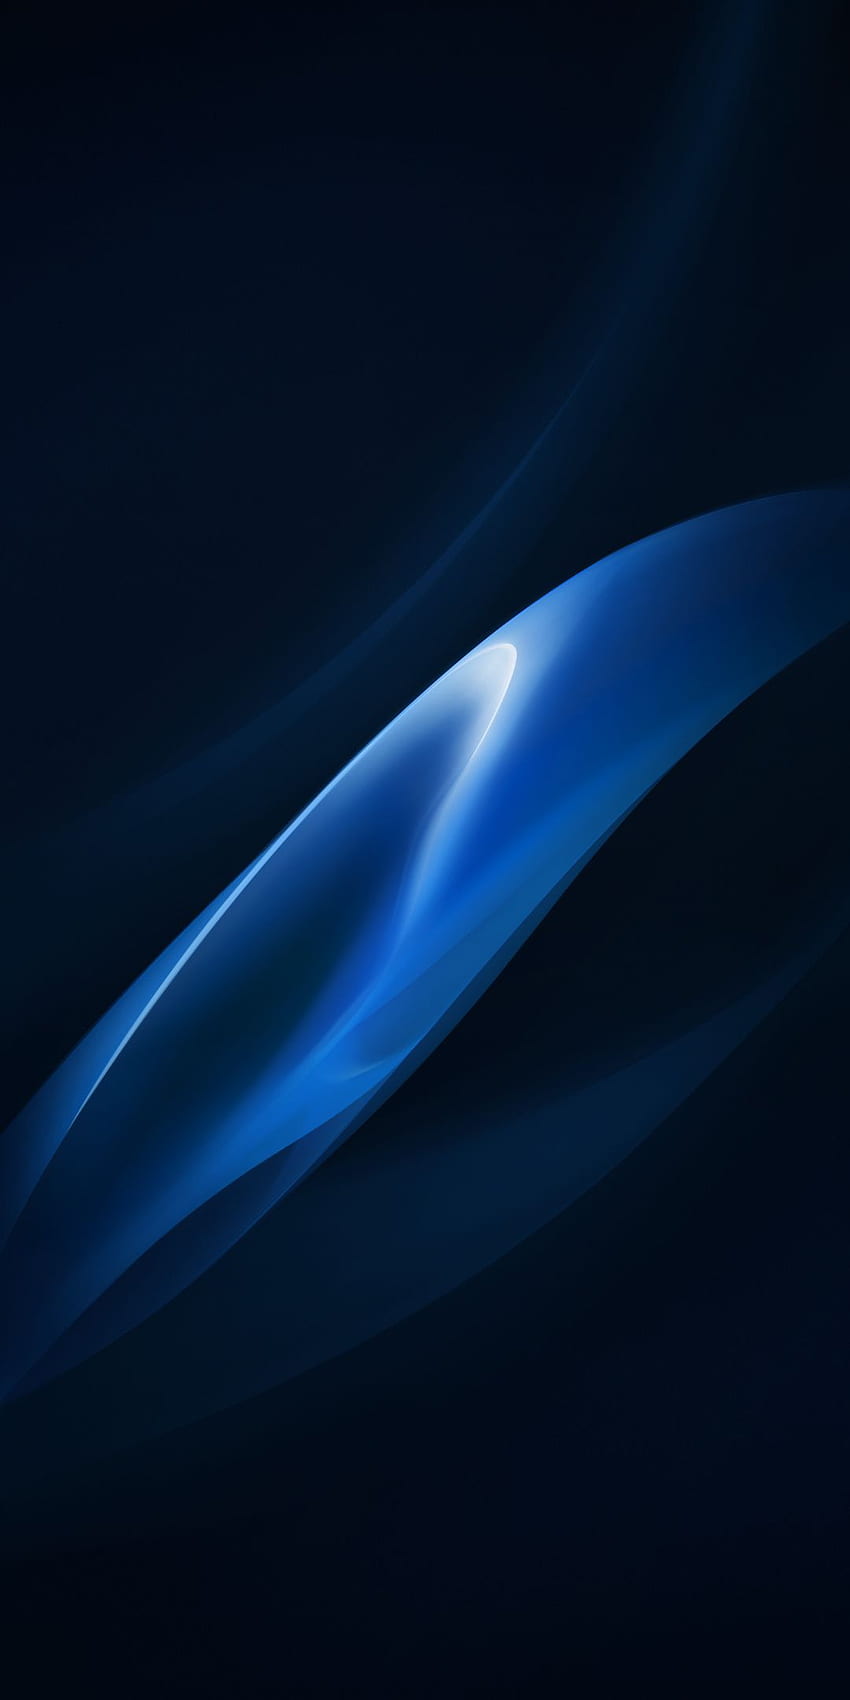 Xiaomi Redmi Note 5 Pro with Abstract Blue Light - . . High Resolution HD phone wallpaper